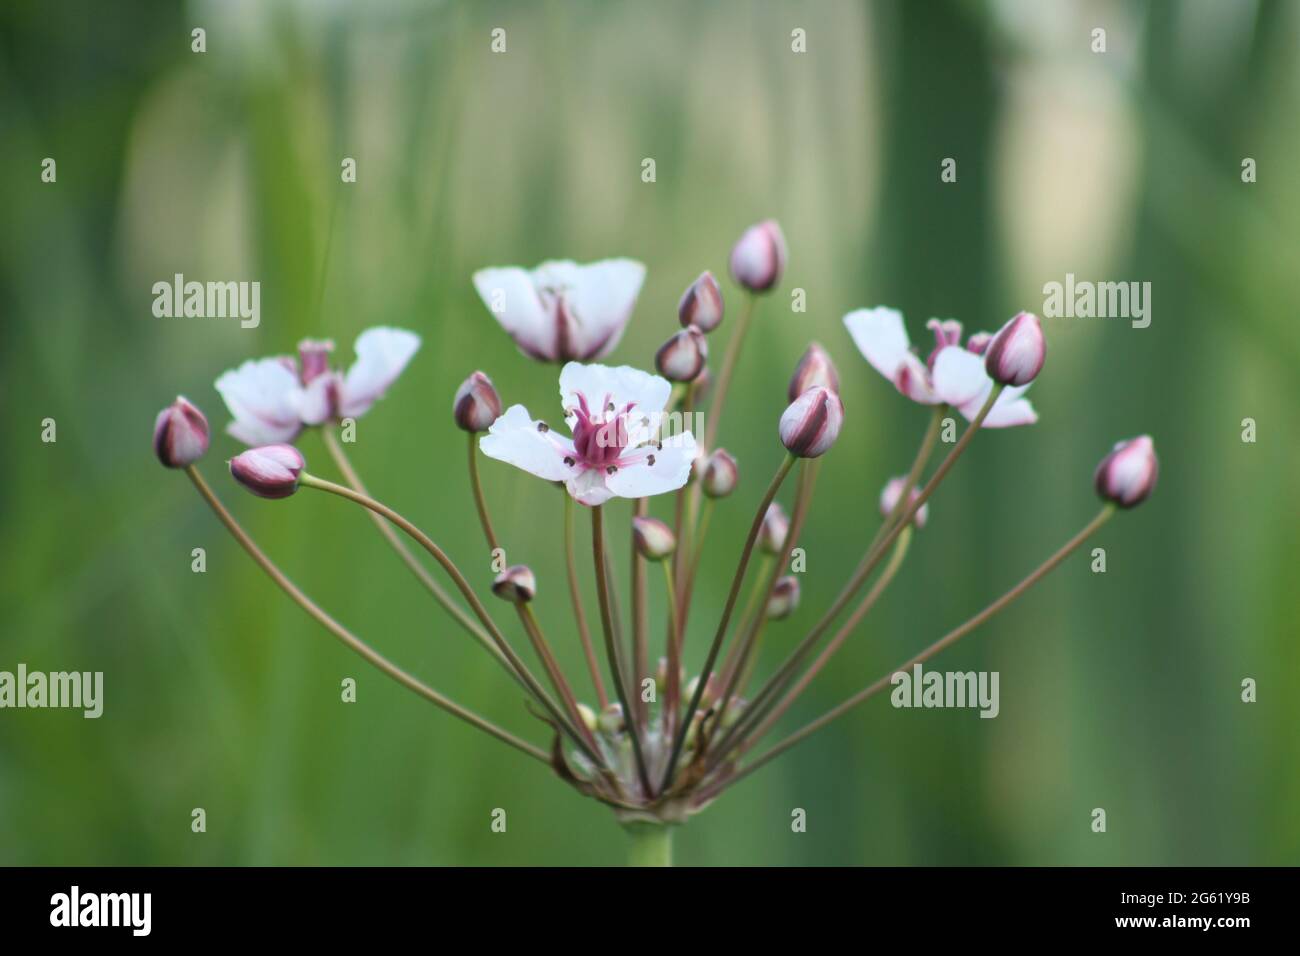 Flowering rush in bloom close-up view with green background Stock Photo